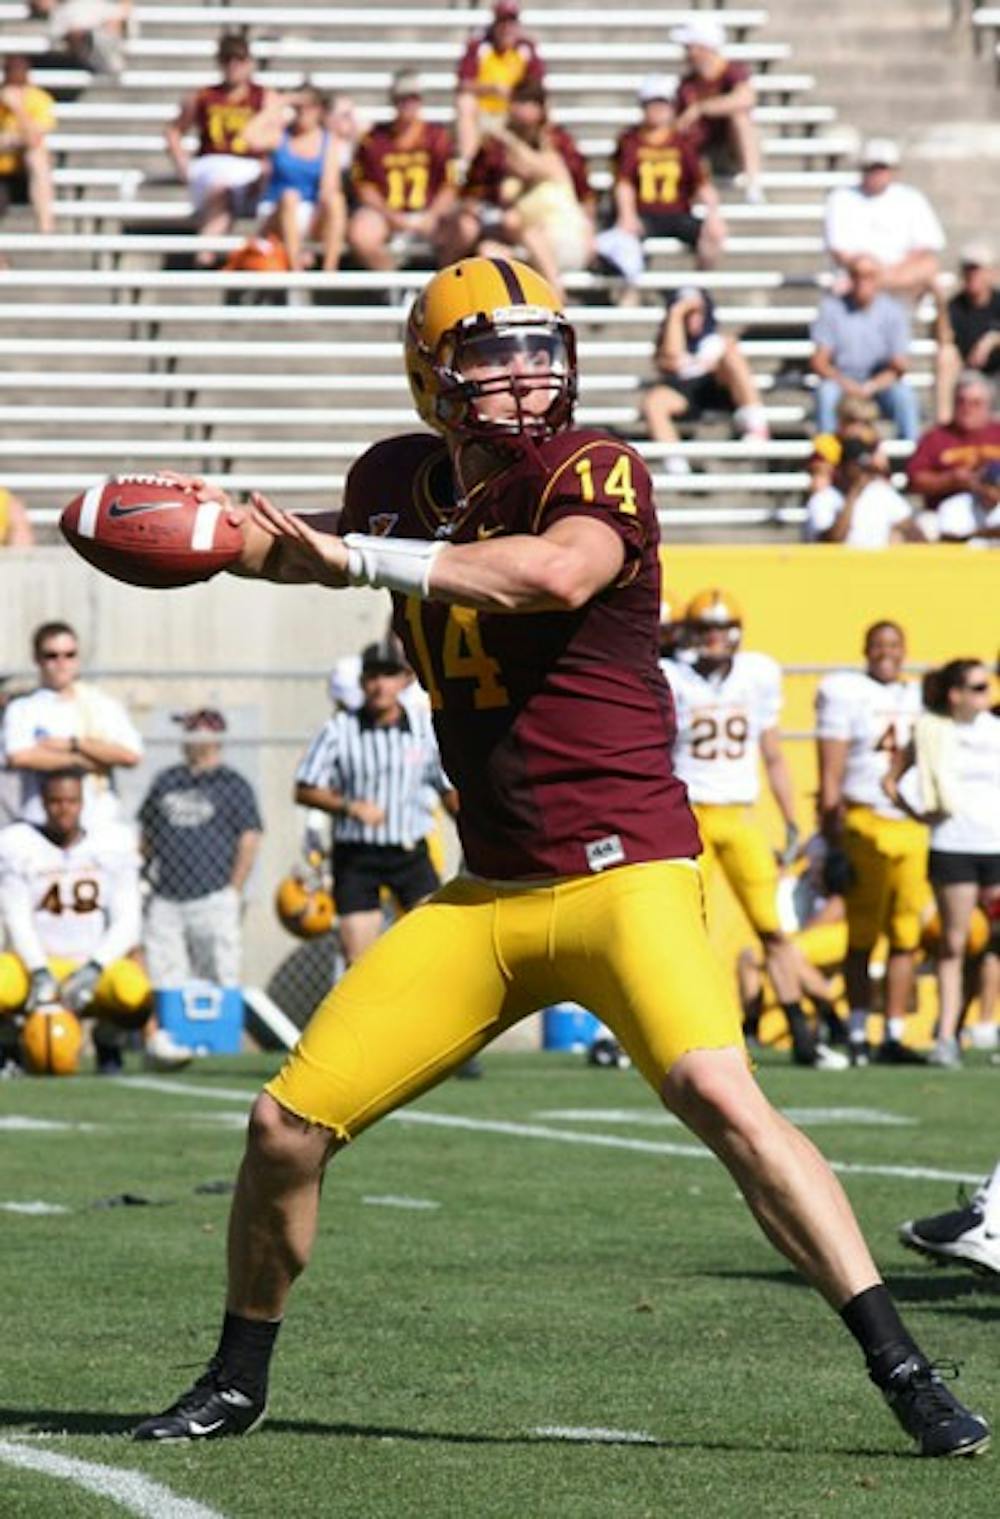 MAKING HIS READS: ASU junior quarterback Steven Threet gets ready to pass during Saturday’s spring game at Sun Devil Stadium. (Photo by Andrew Pentis)